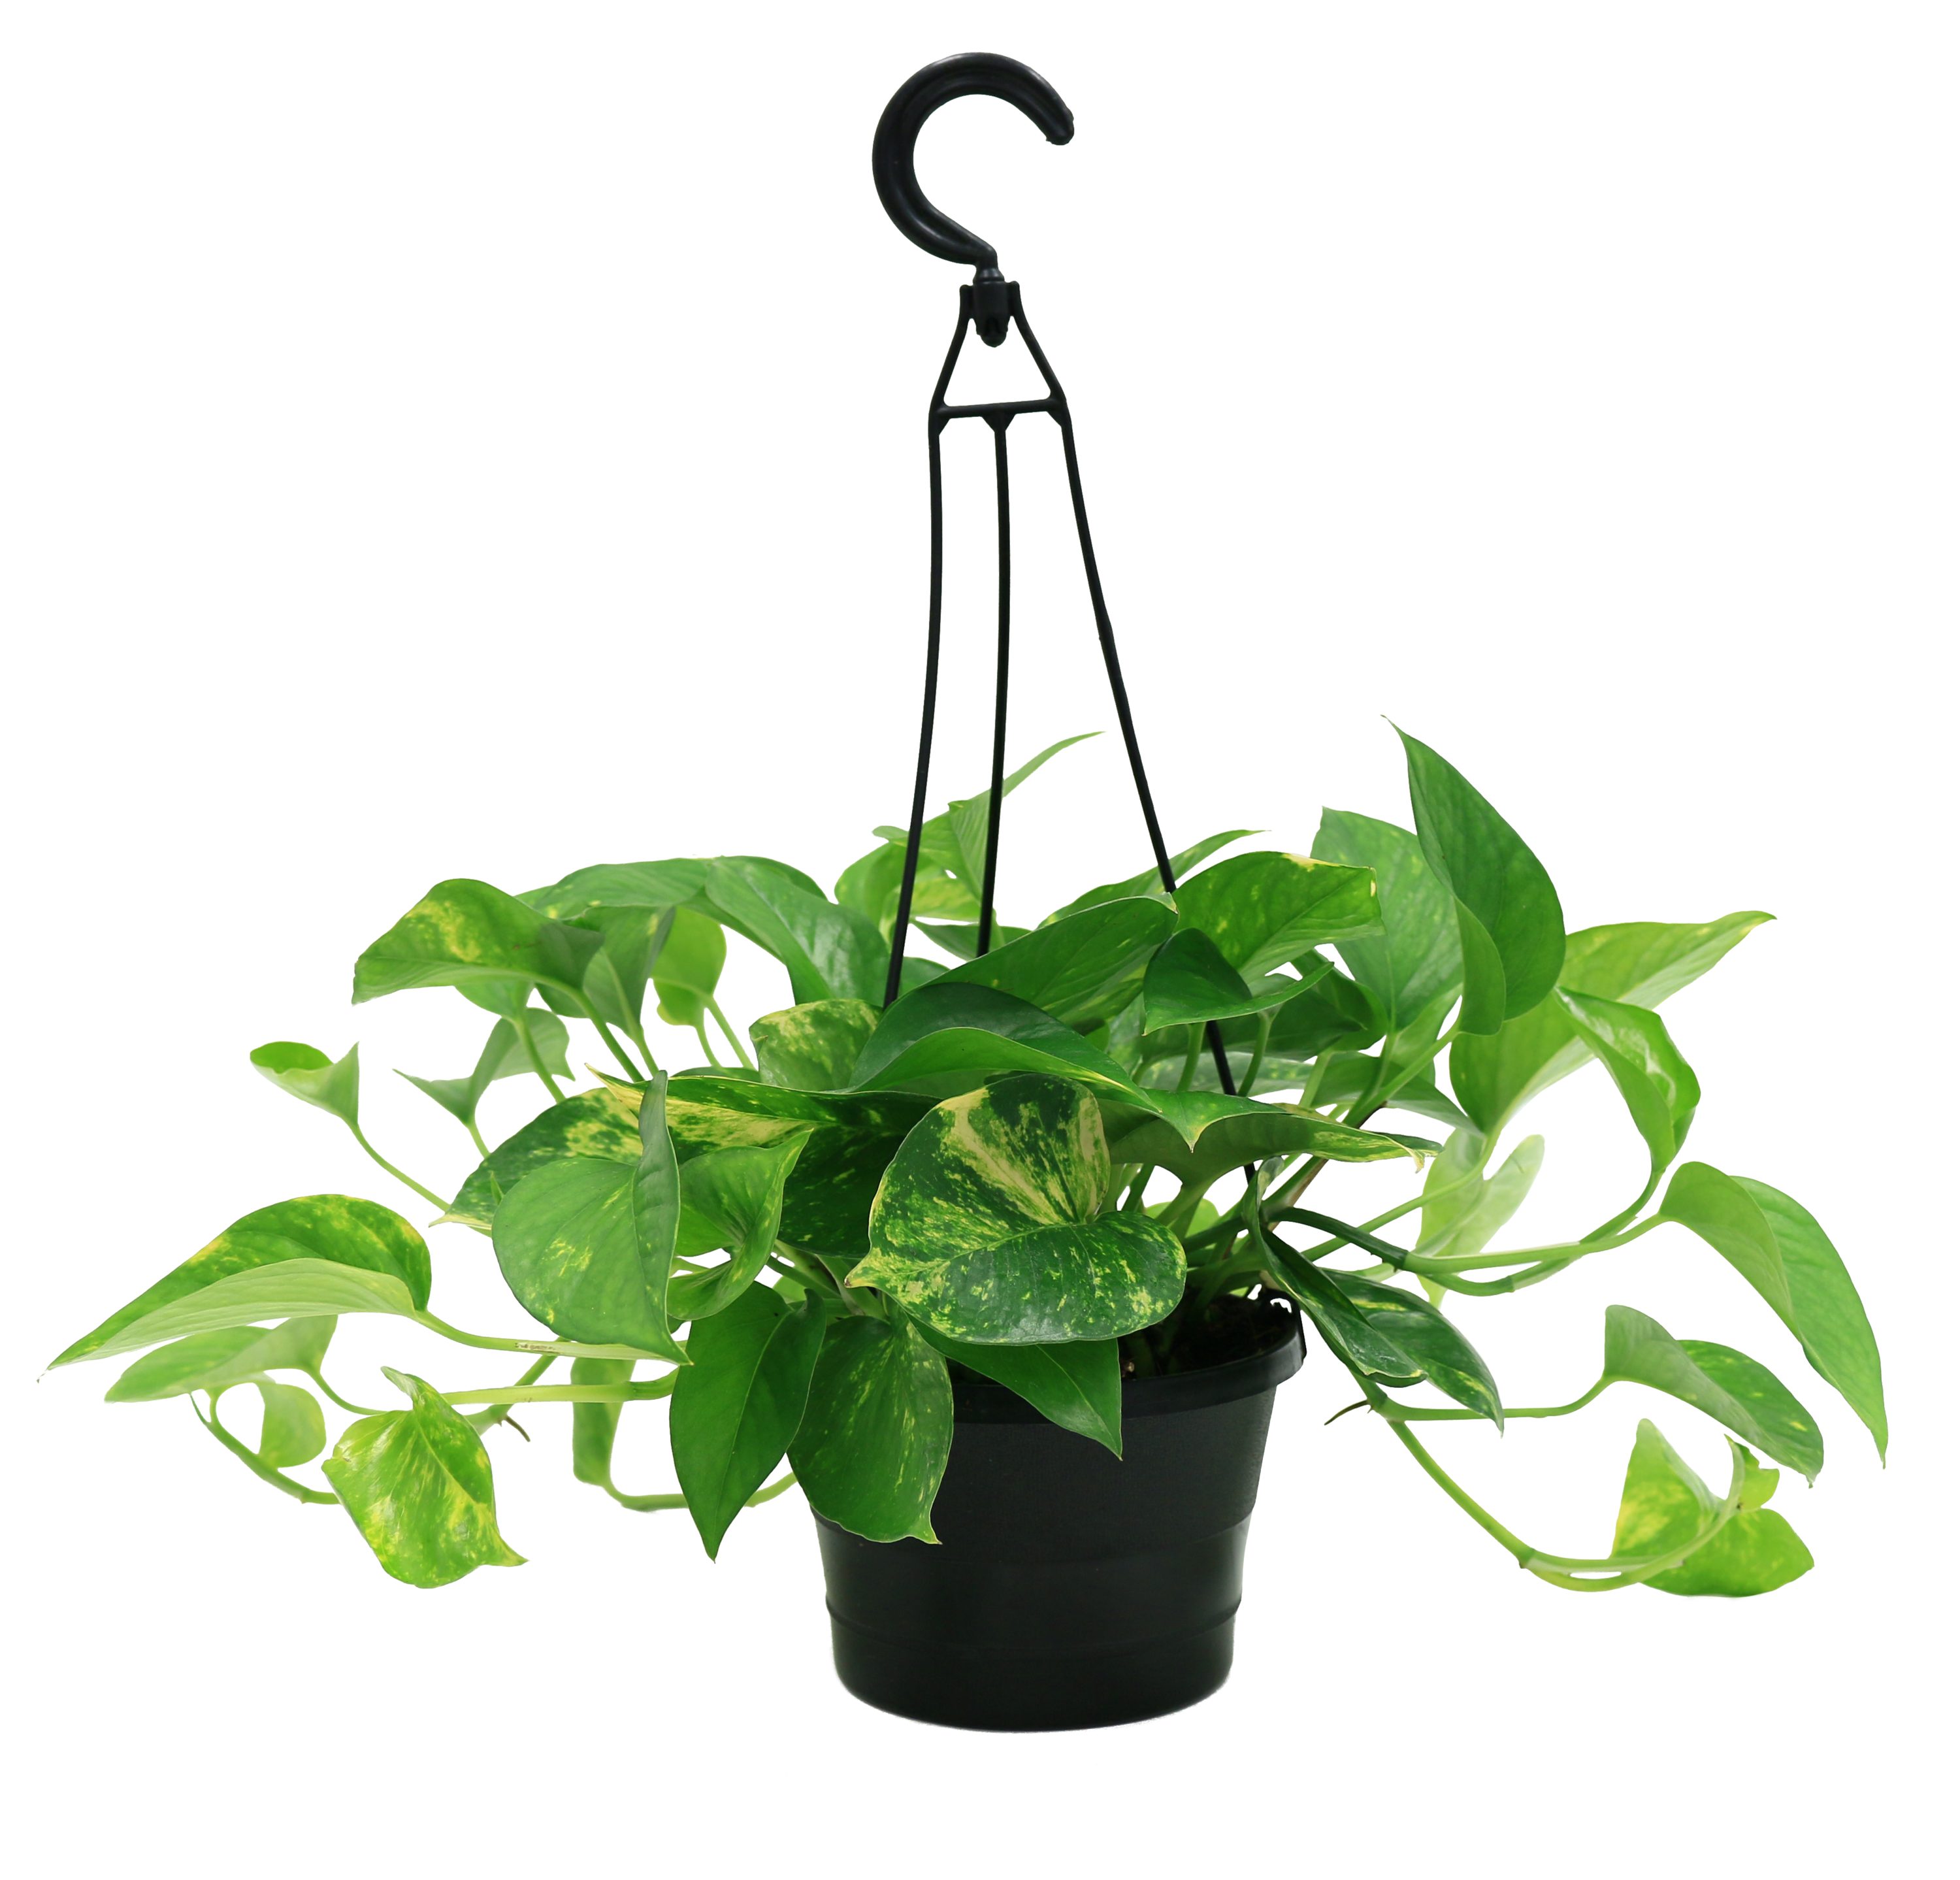 Costa Farms Devil's Ivy House in 6-in Hanging Basket in the House Plants department Lowes.com